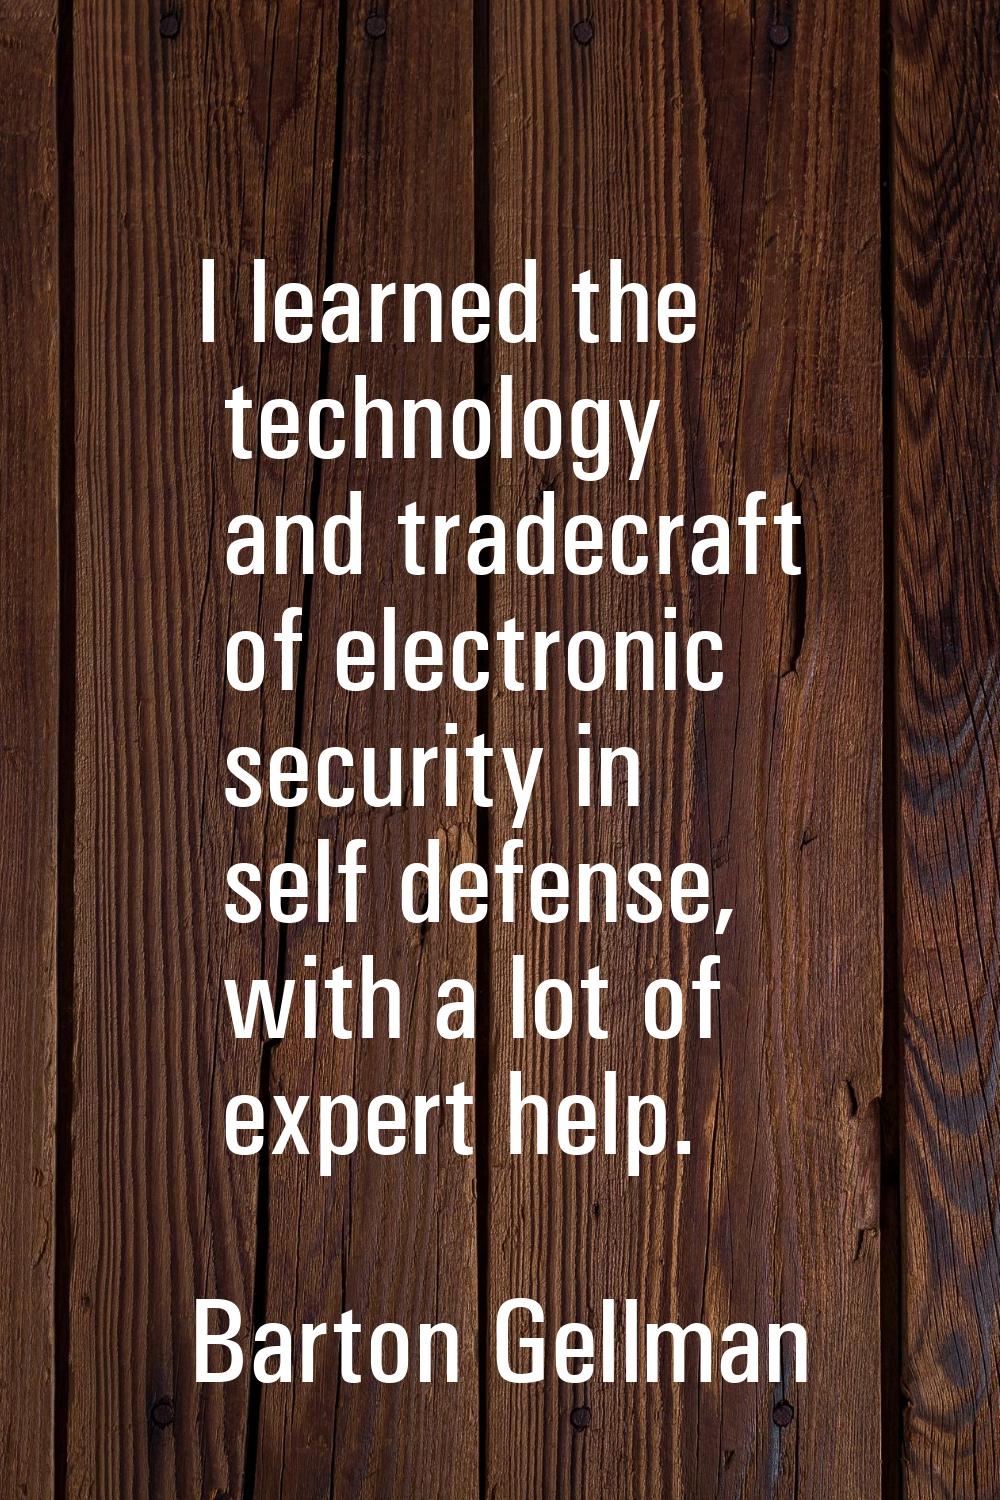 I learned the technology and tradecraft of electronic security in self defense, with a lot of exper